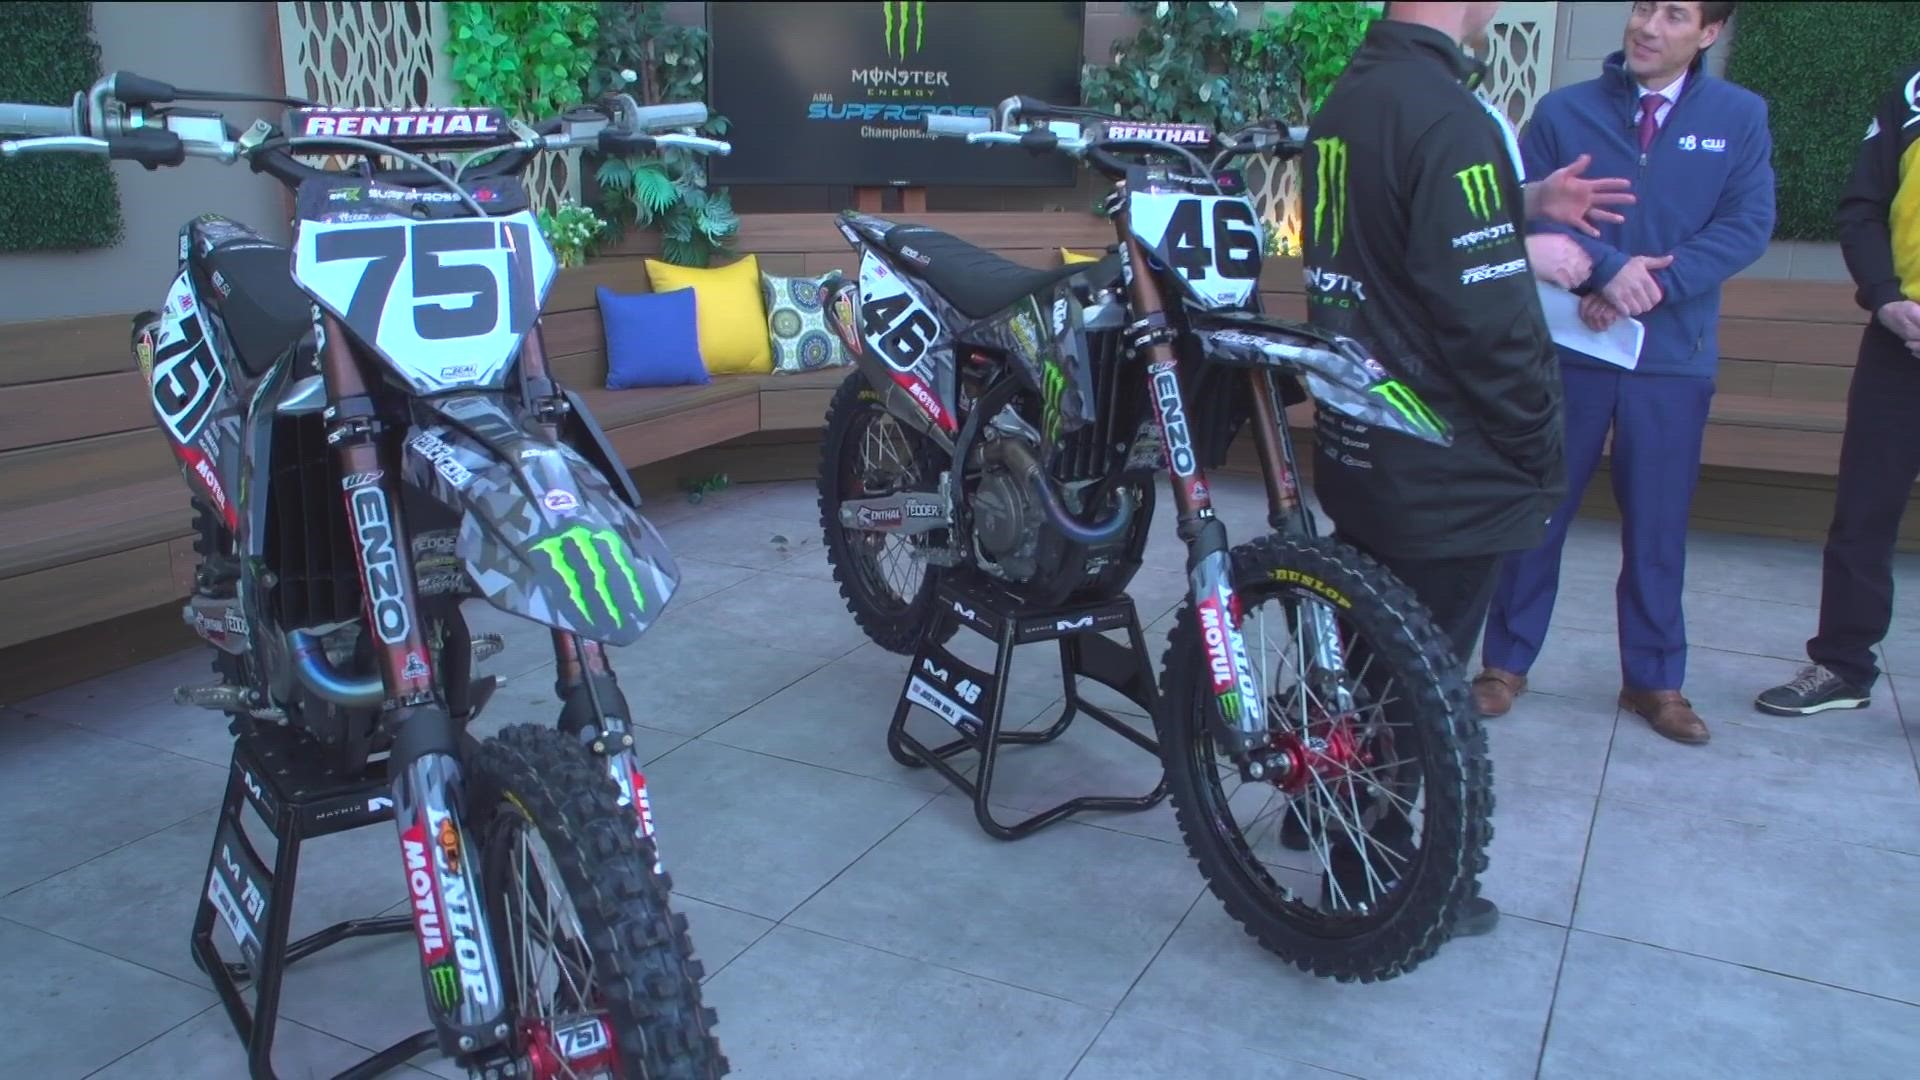 Broc Glover, Josh Hill and Justin Hill talked about Supercross returning to Mission Valley and what it will be like racing at a new venue.